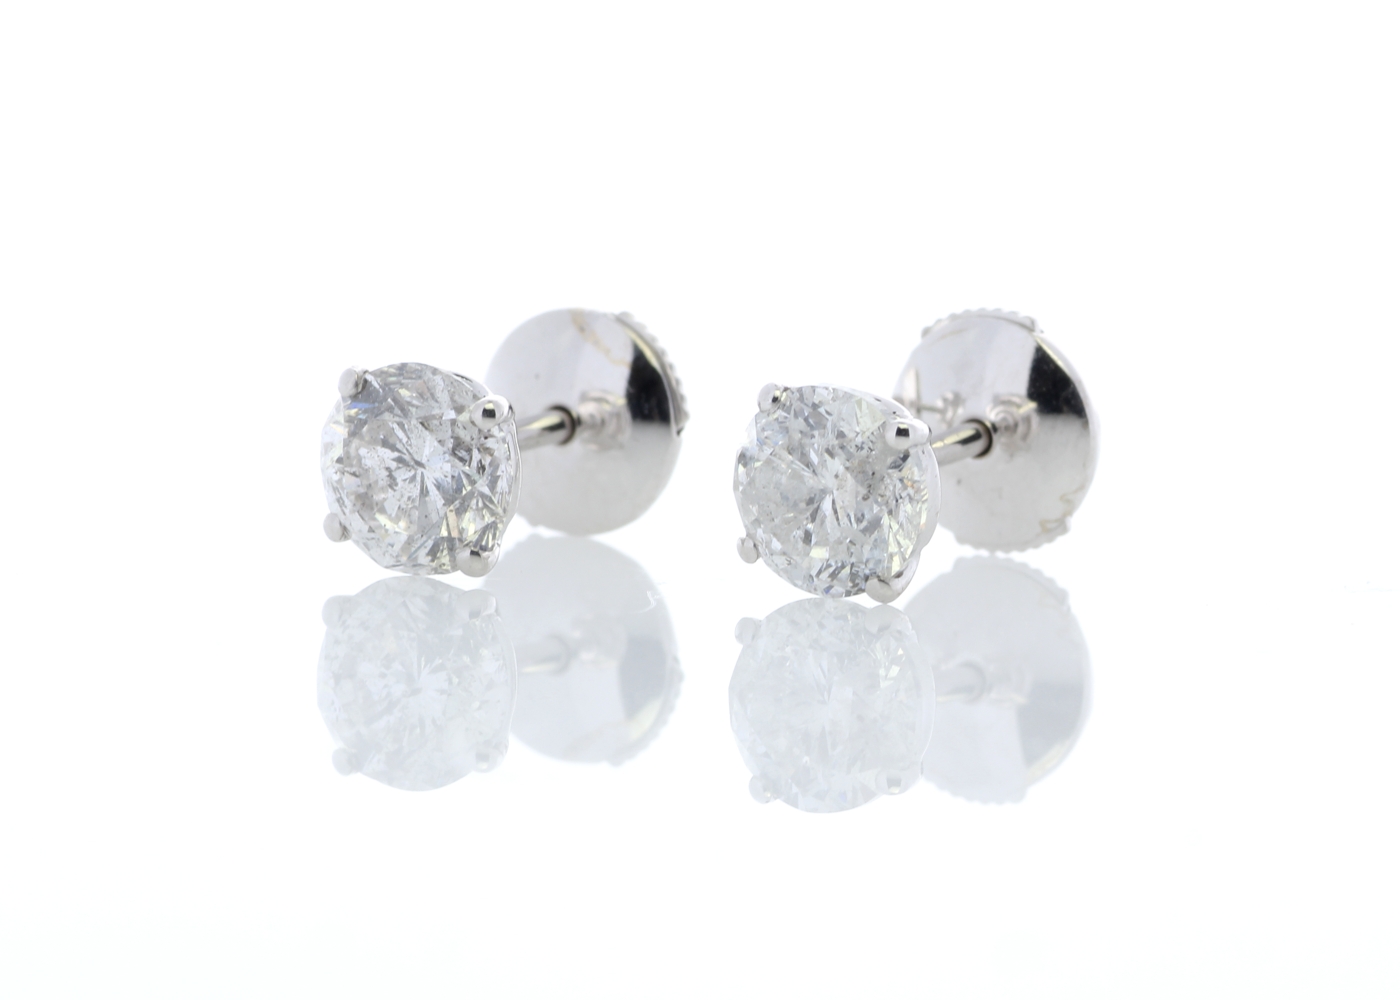 18ct White Gold Claw Set Diamond Earrings 2.21 Carats - Image 2 of 4